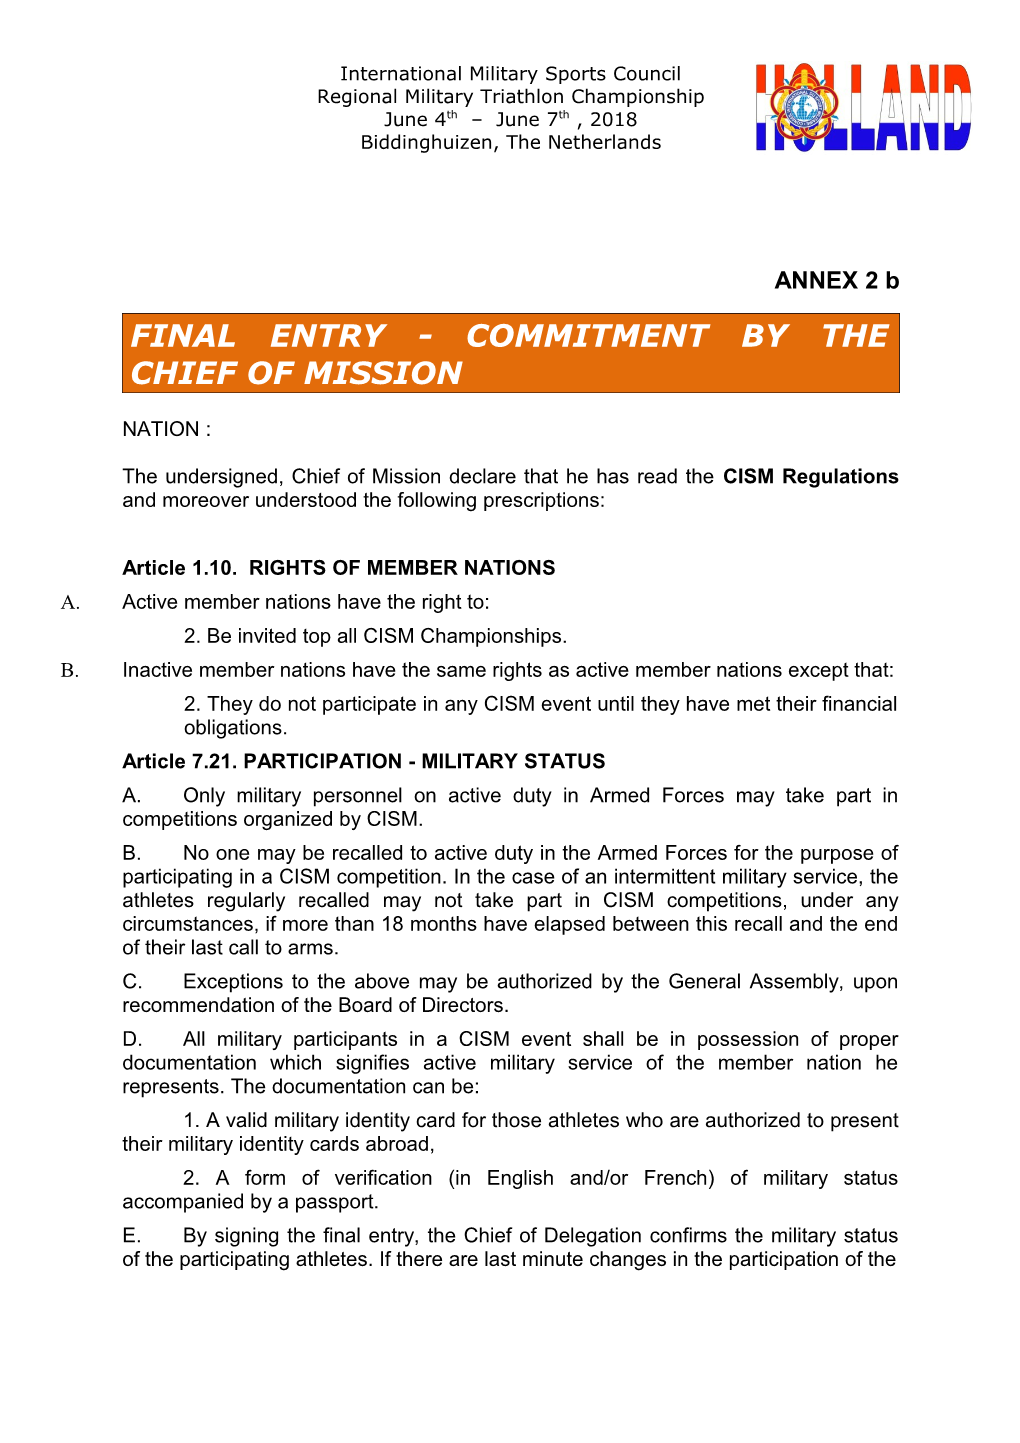 Final Entry - COMMITMENT by the CHIEF of MISSION